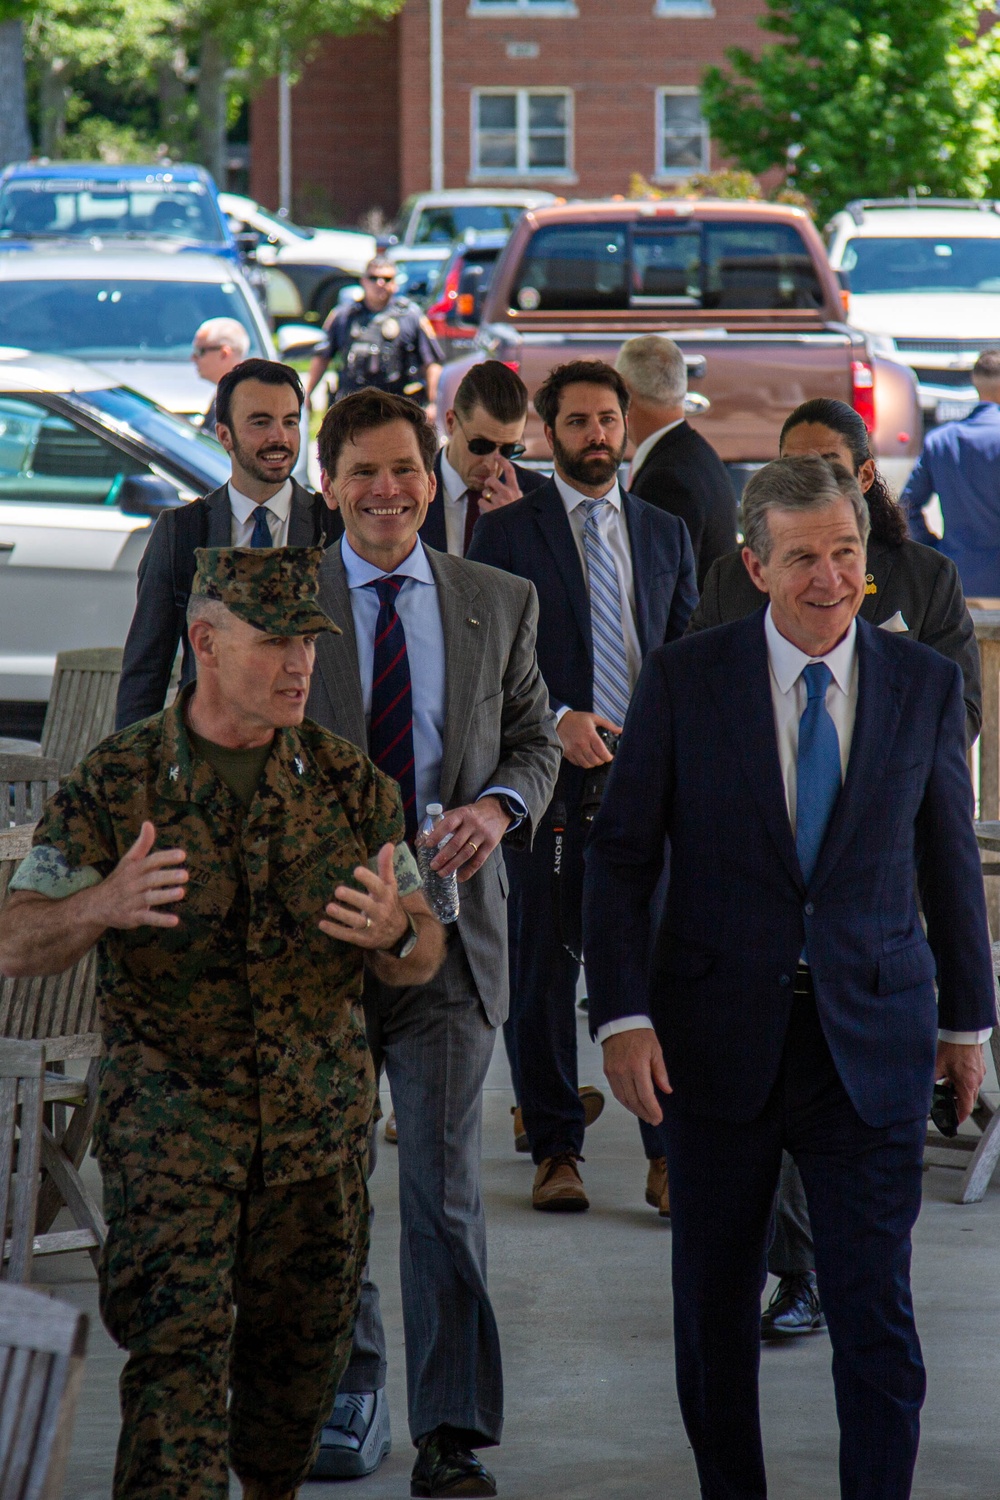 North Carolina Governor Roy Cooper conducts official visit of Camp Lejeune 